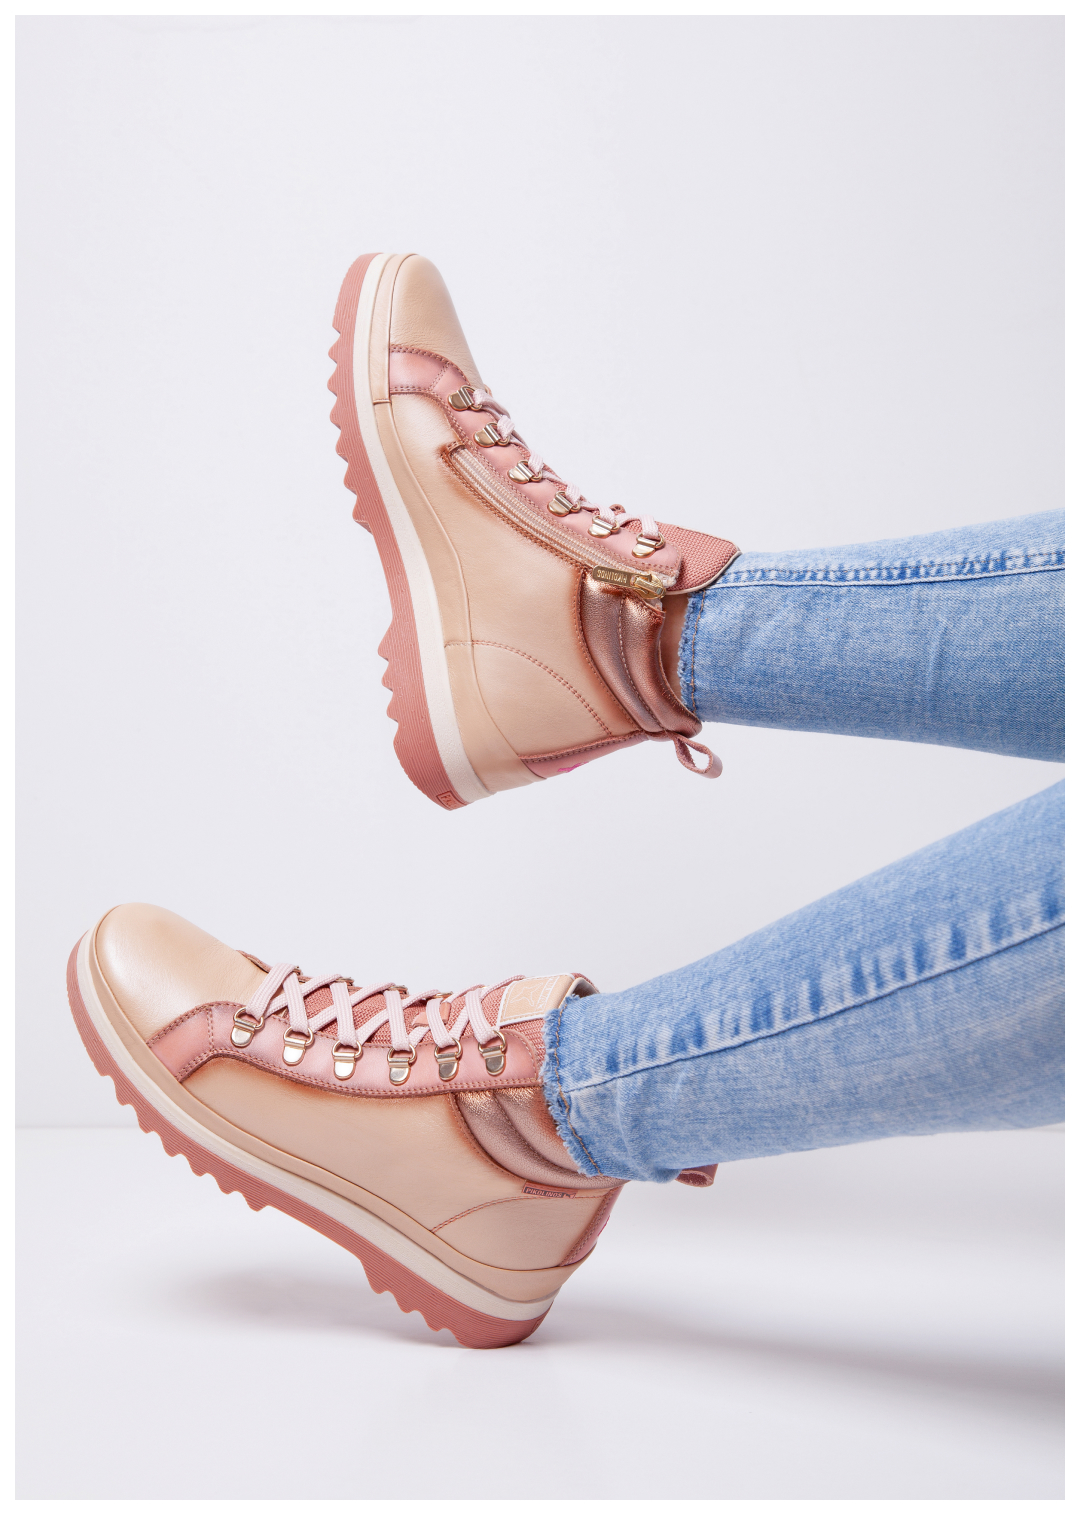 Picture of a woman's legs
with pink Vigo ankle boots